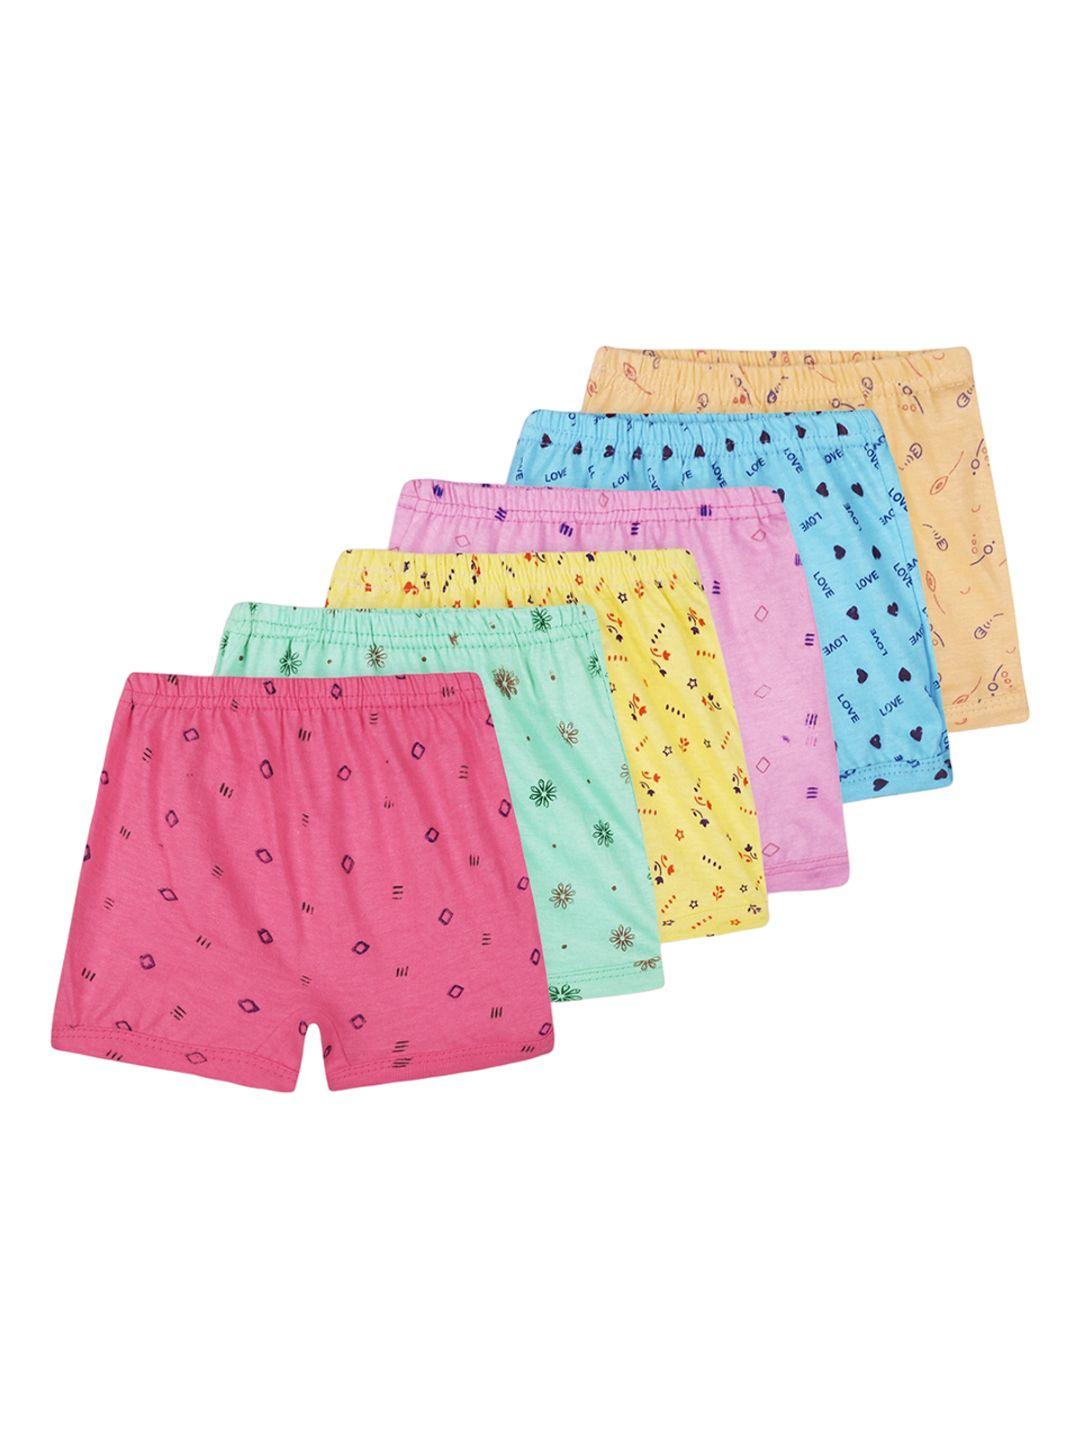 baesd infants pack of 6 printed pure cotton boy short briefs